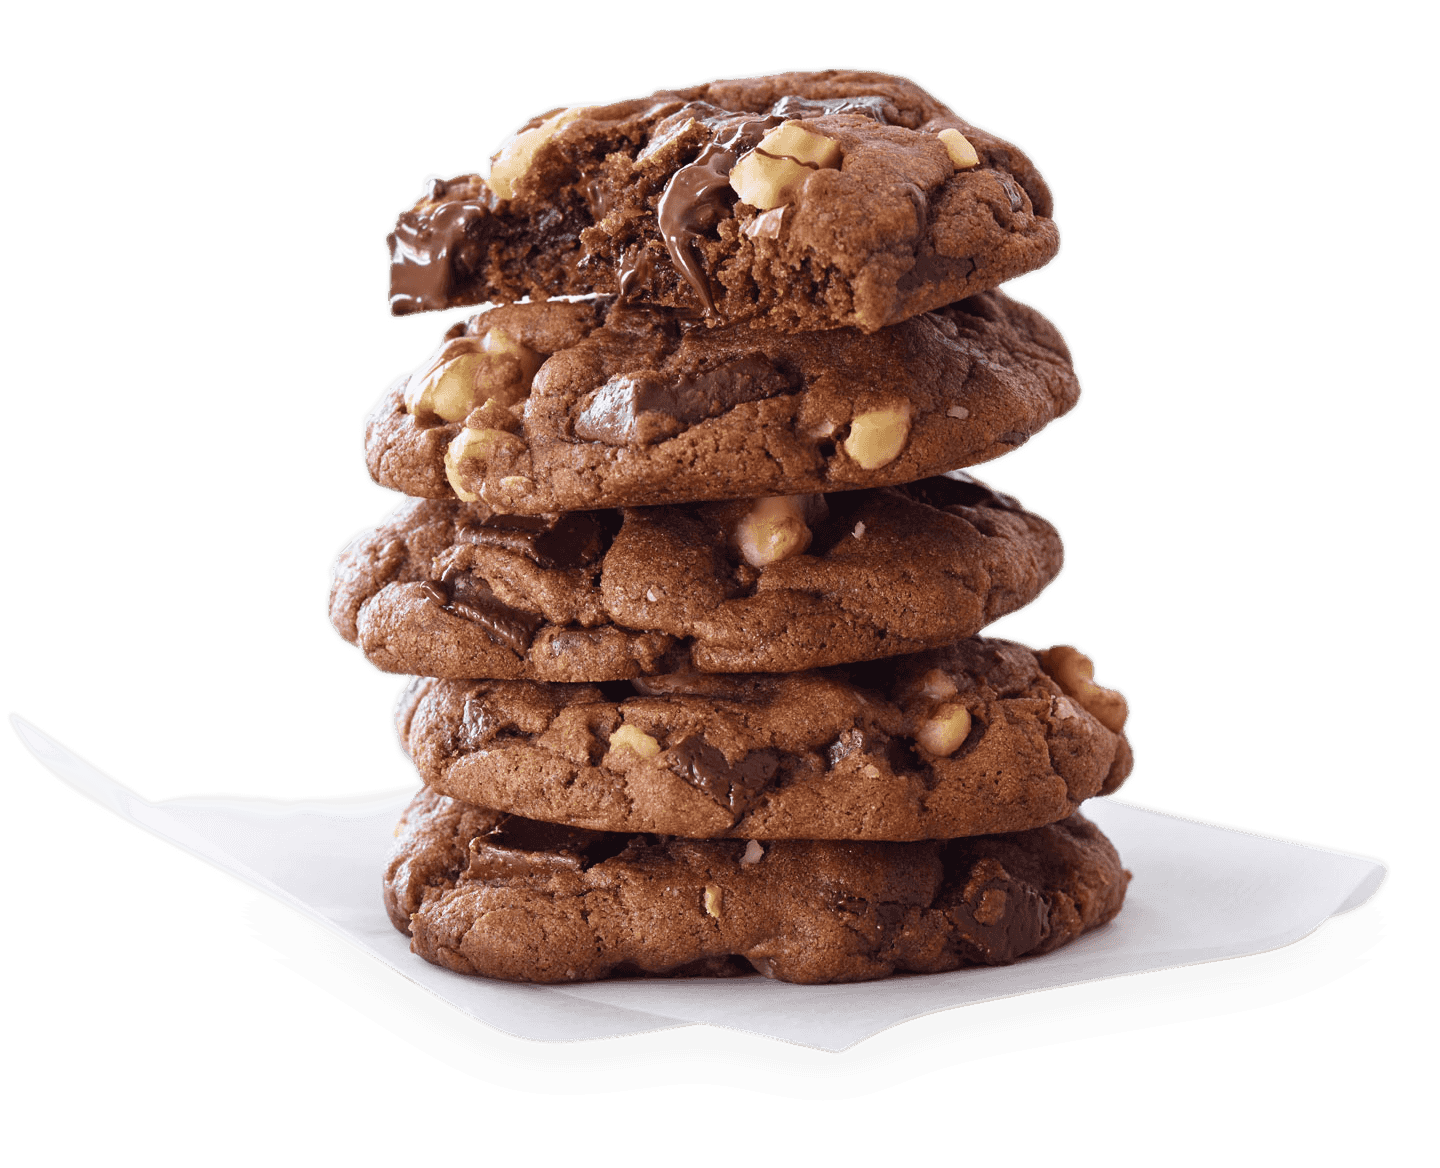 Image of stack of cookies.